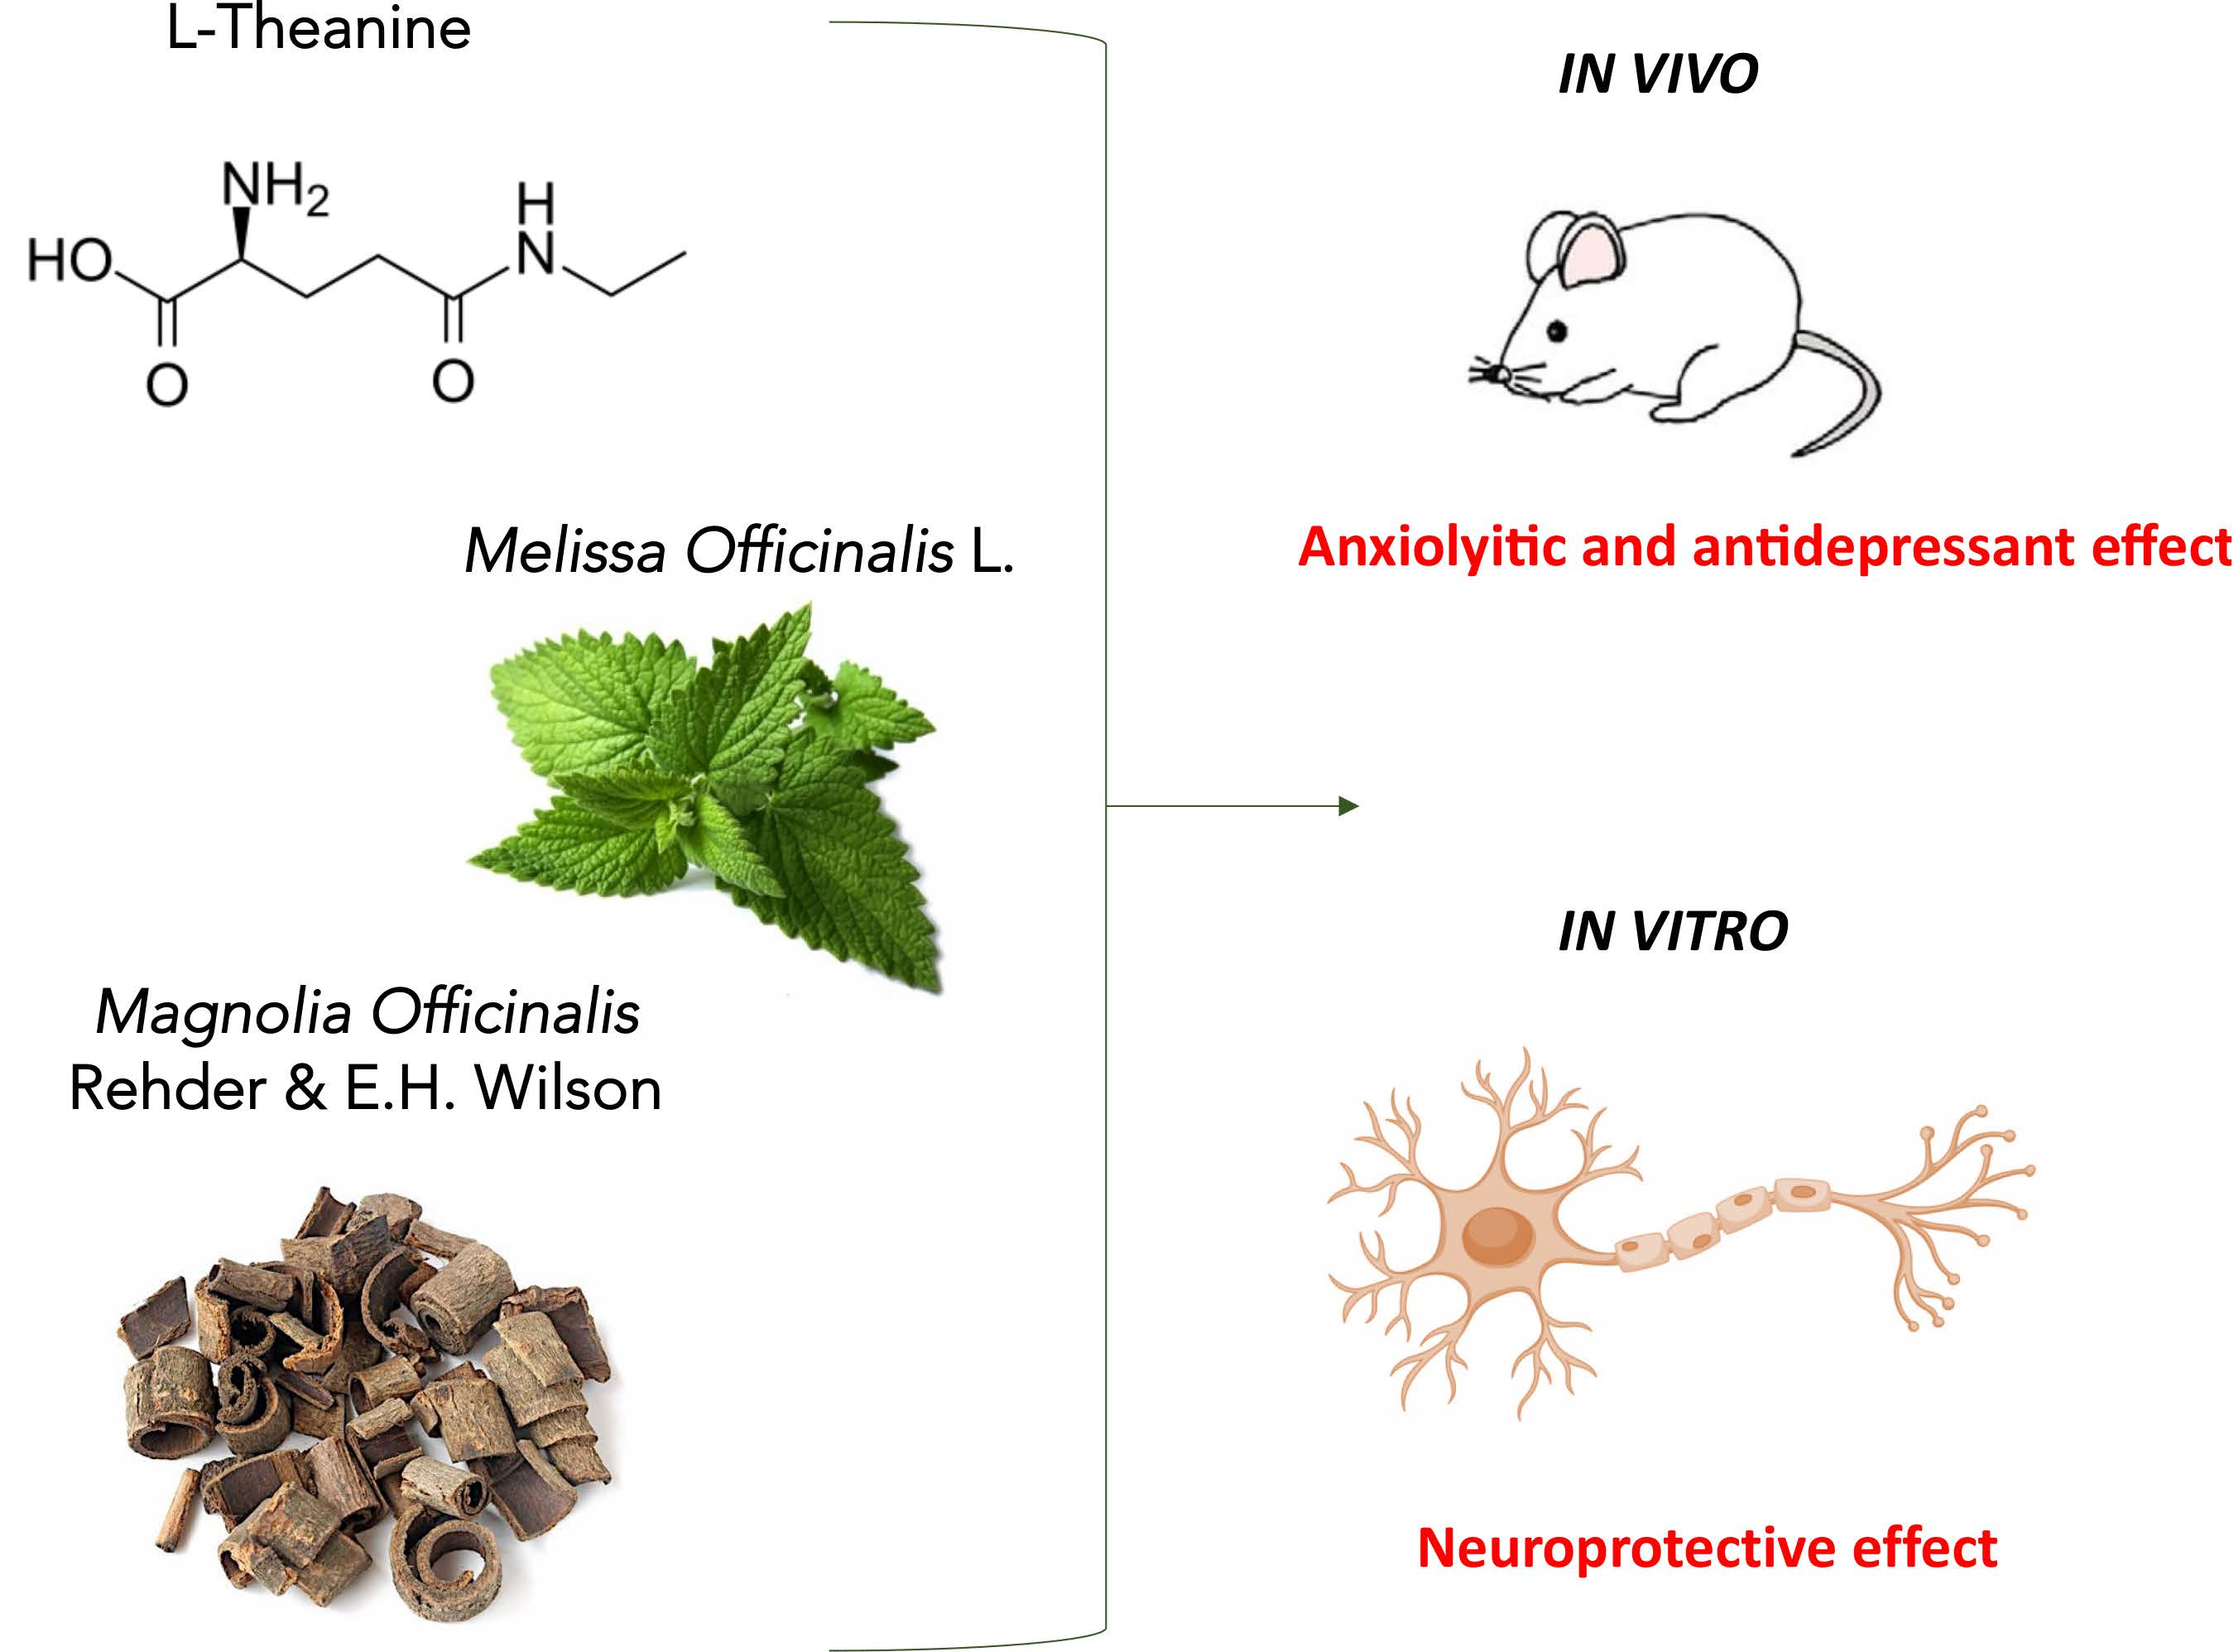 Nutrients | Free Full-Text | Novel Therapeutic Approach for the Management  of Mood Disorders: In Vivo and In Vitro Effect of a Combination of  L-Theanine, Melissa officinalis L. and Magnolia officinalis Rehder